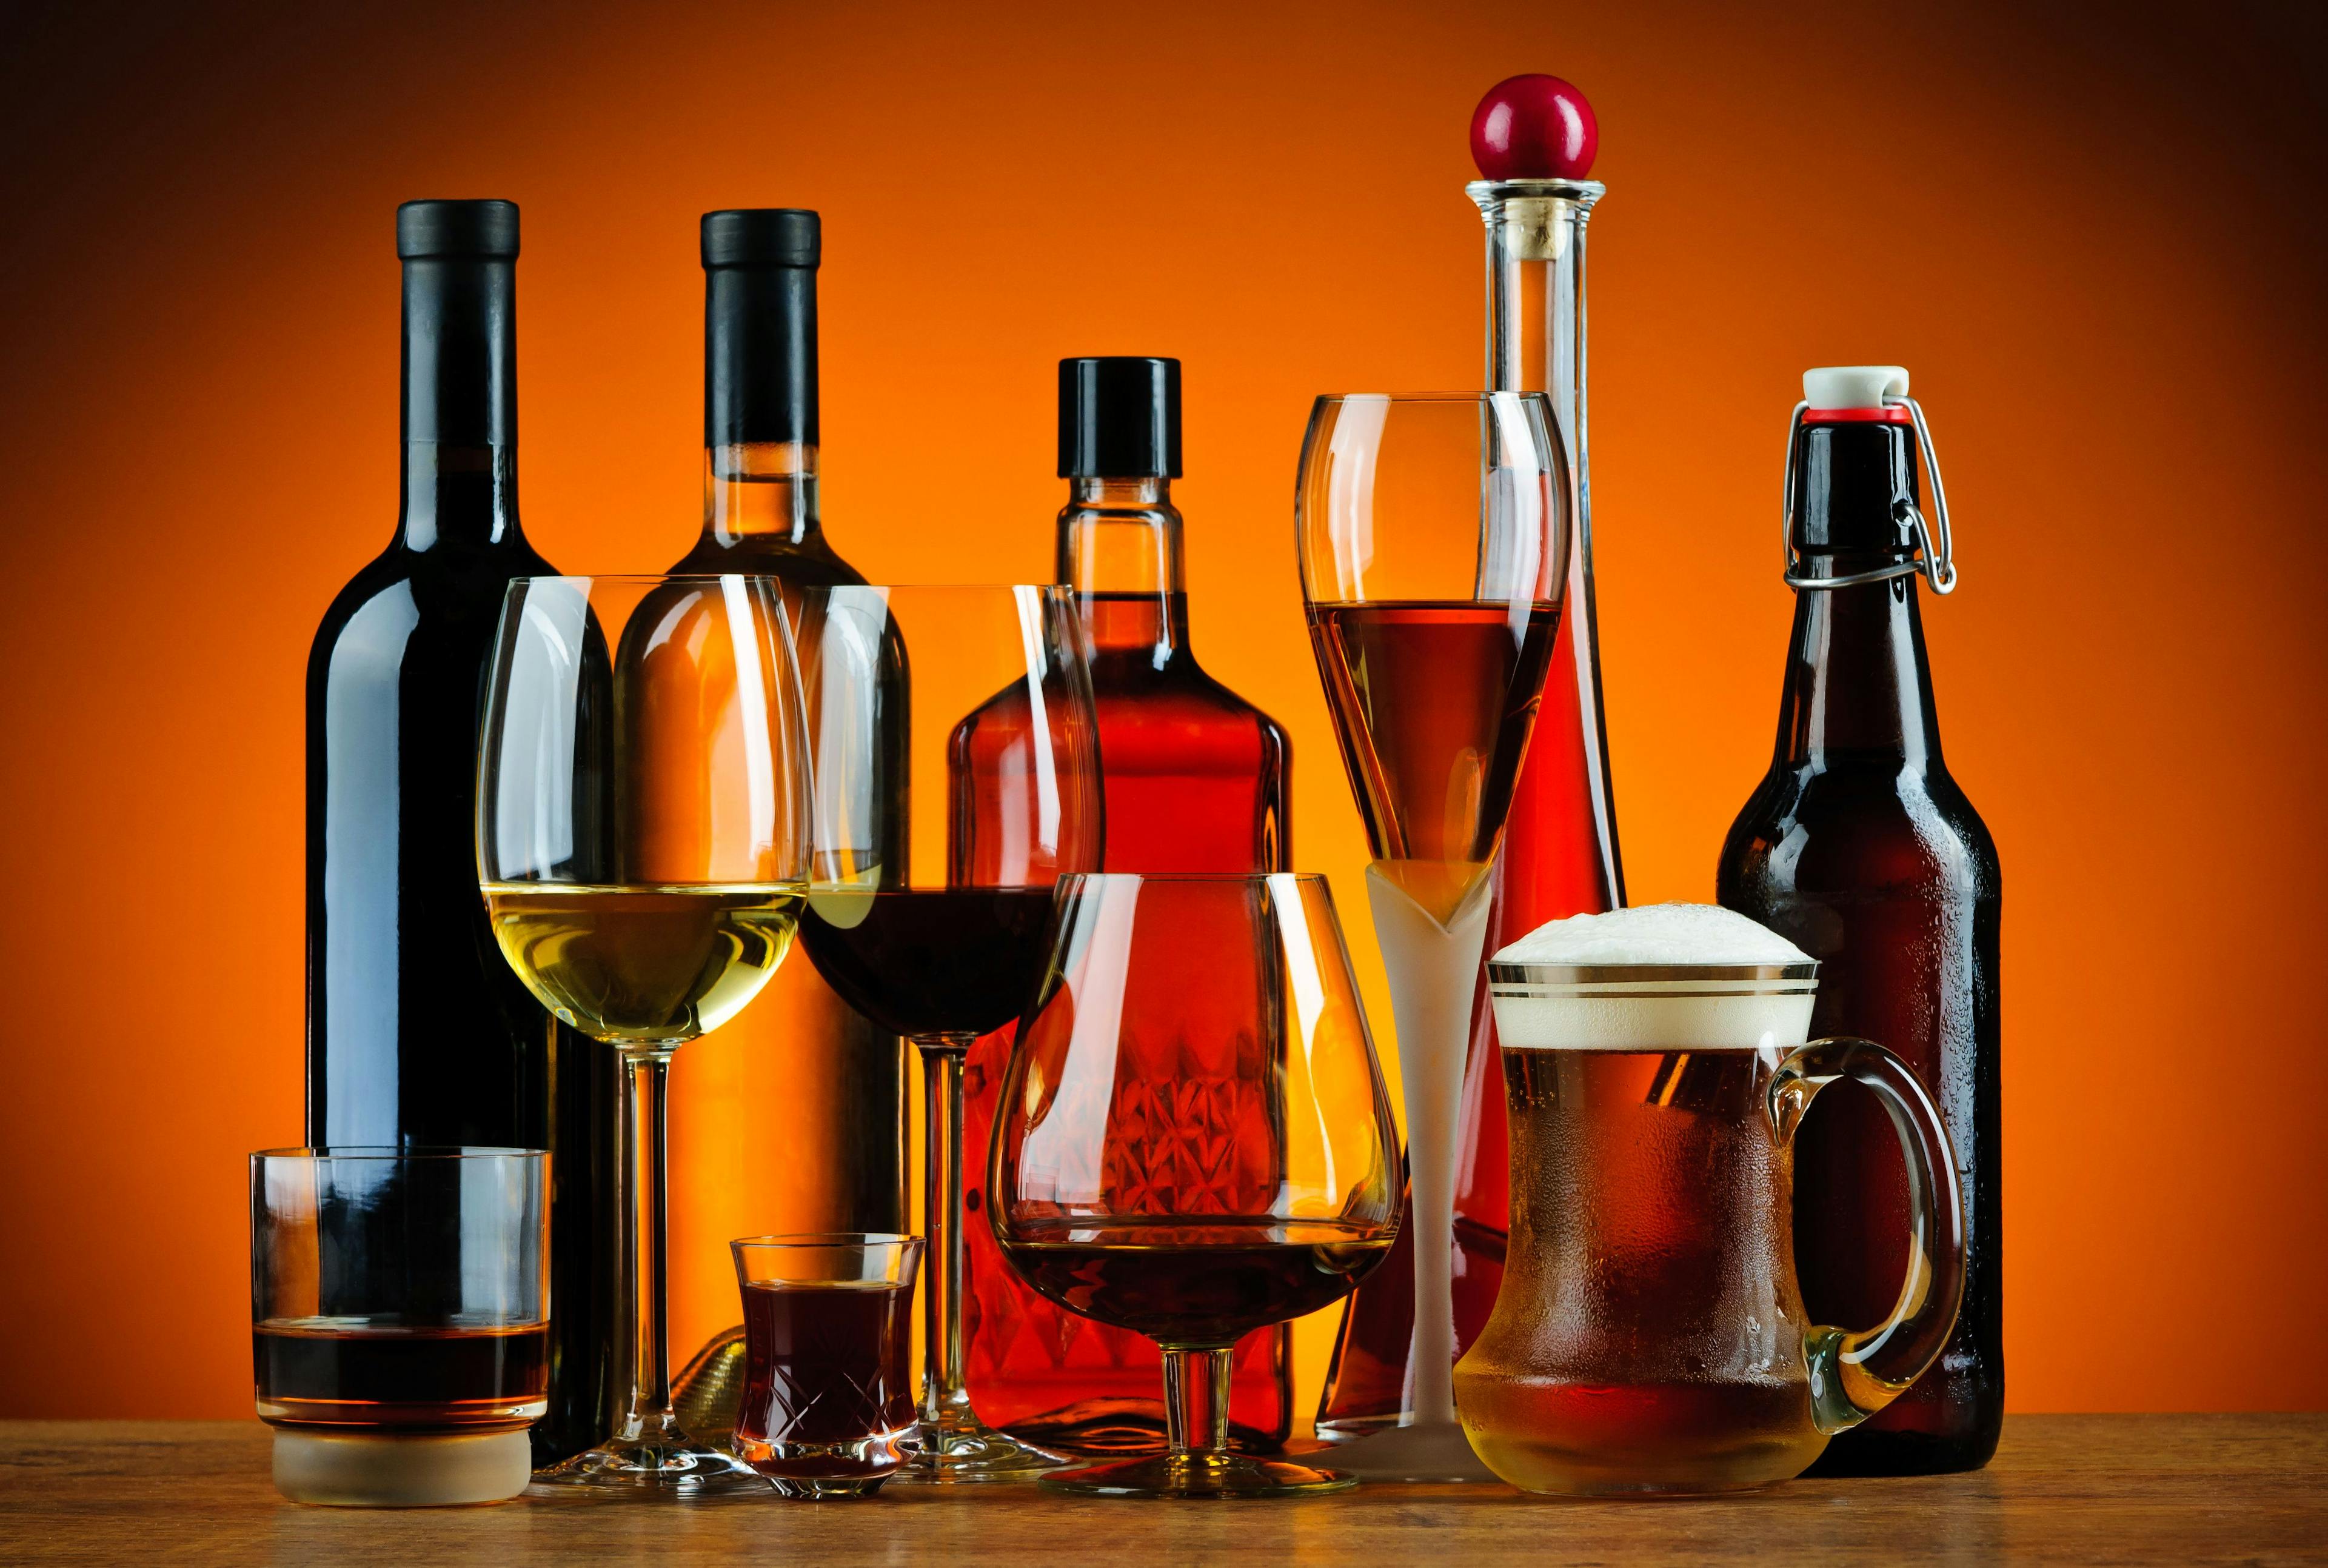 Bottles and glasses of alcohol drinks | Image Credit: © draghicich - stock.adobe.com.